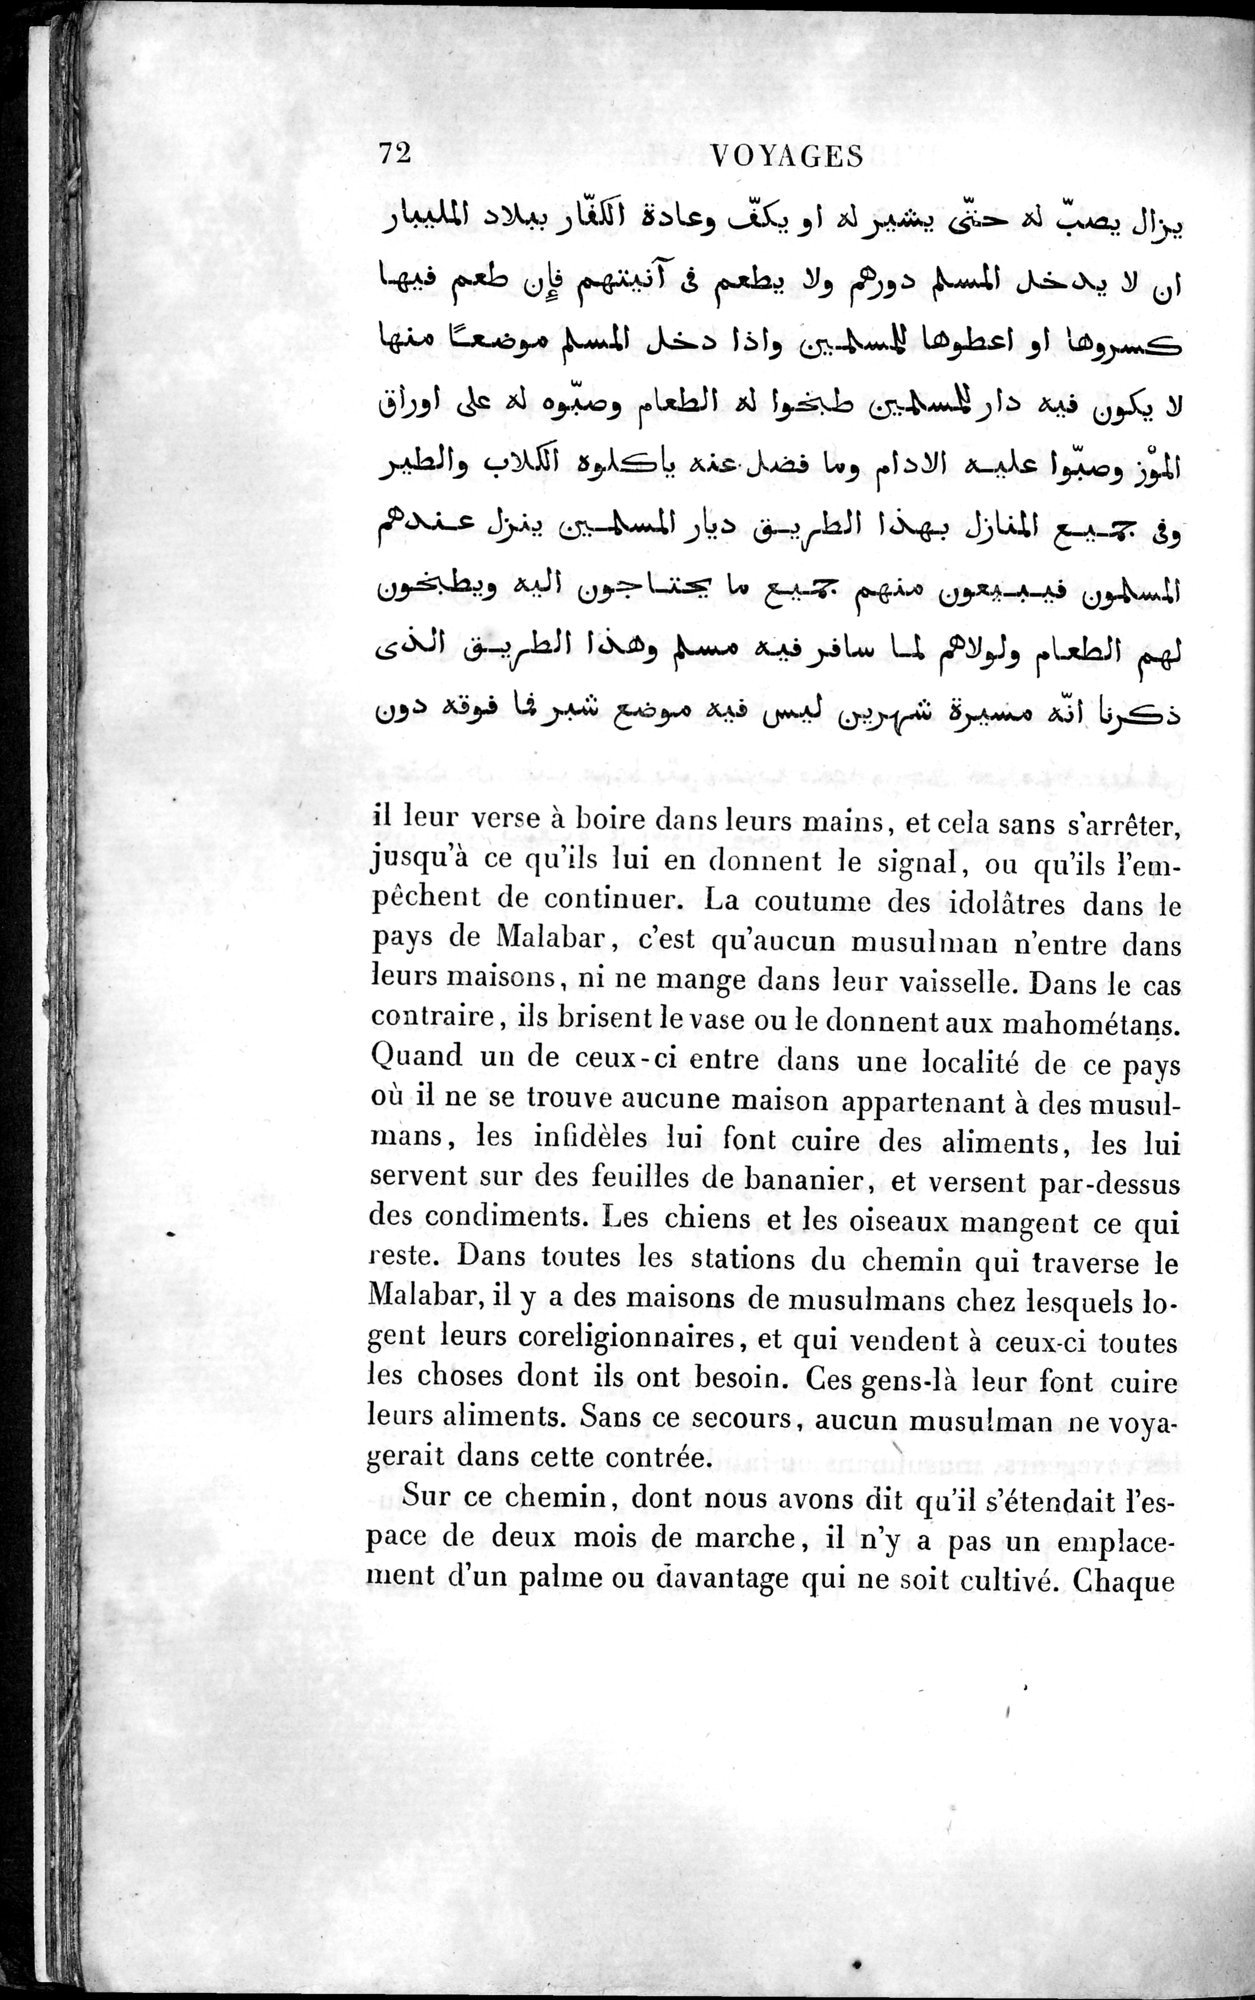 Voyages d'Ibn Batoutah : vol.4 / Page 84 (Grayscale High Resolution Image)